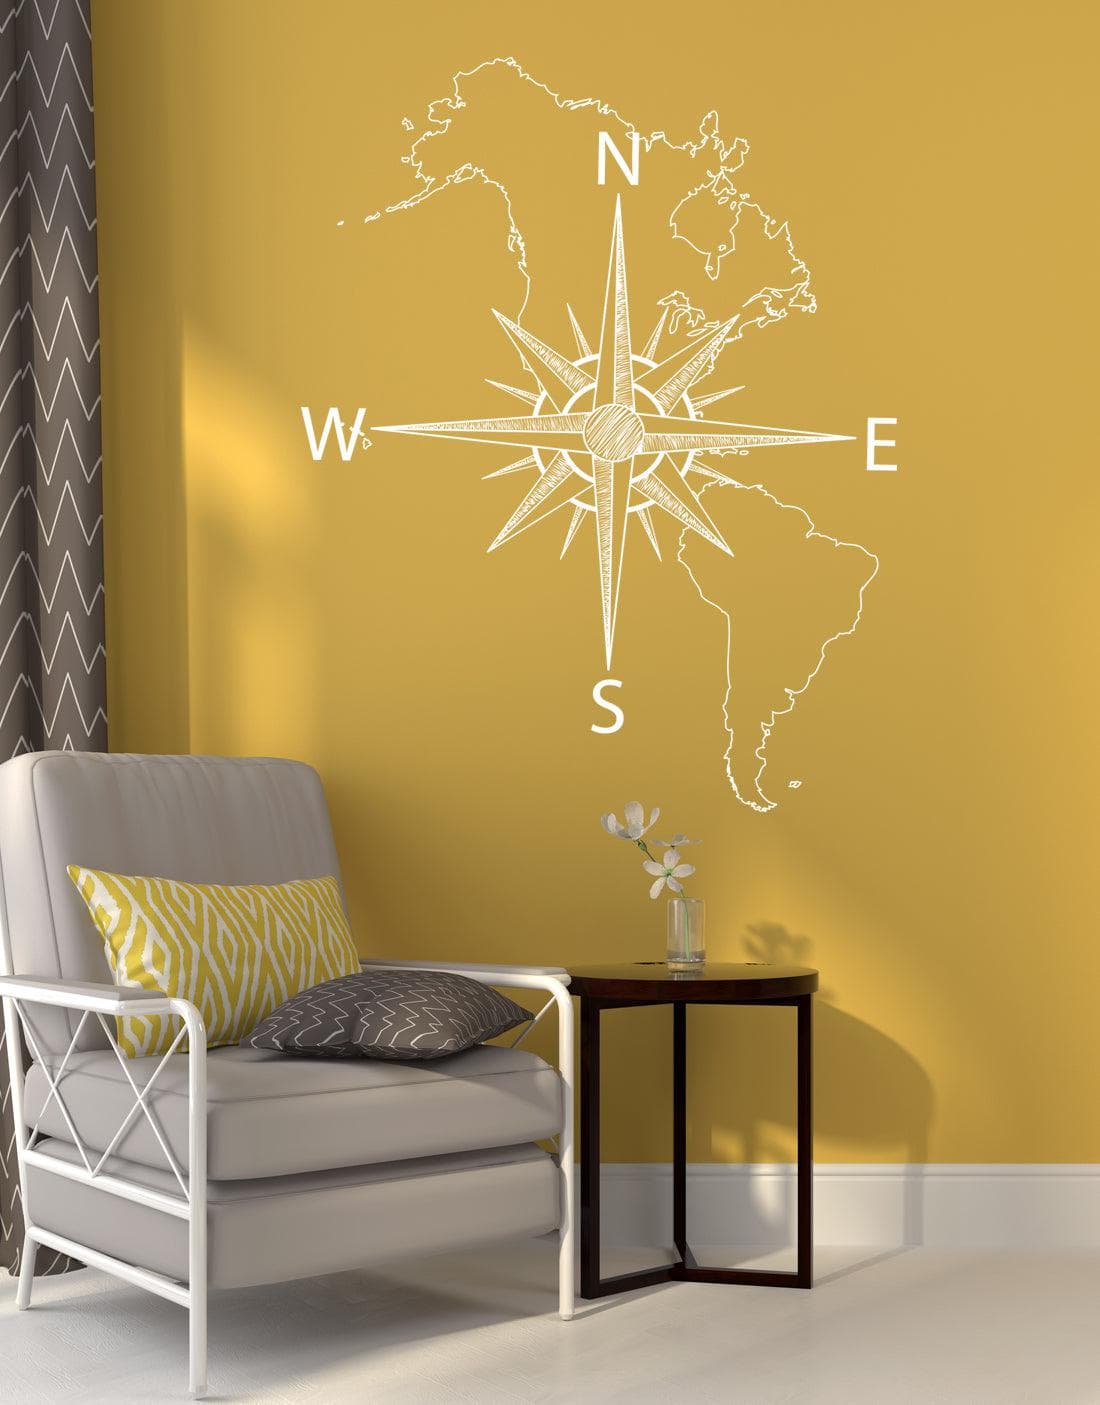 Nautical Map of North & South America w/ Compass Vinyl Wall Decal #6018